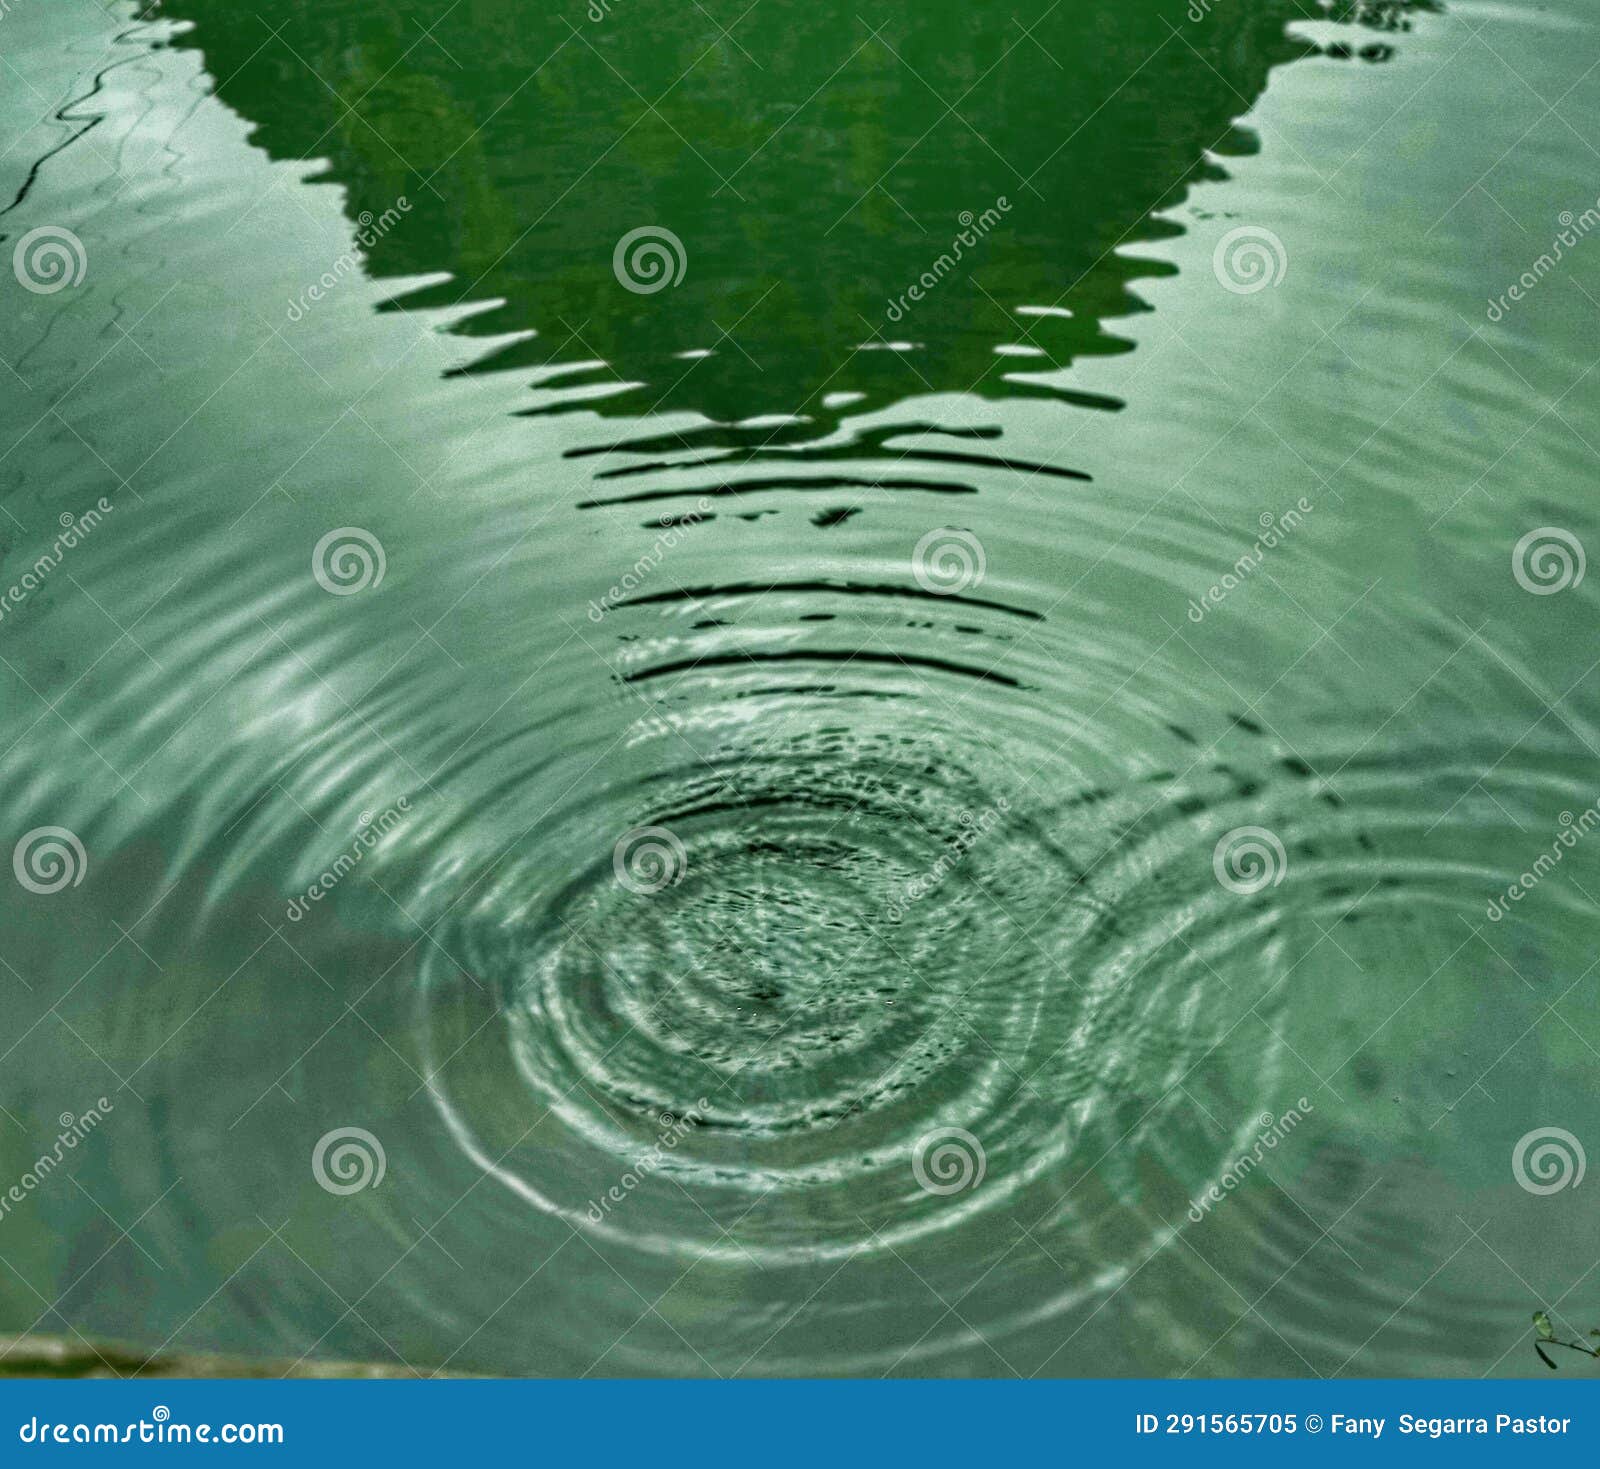 the rain falls on the river water, forming waves with large circles